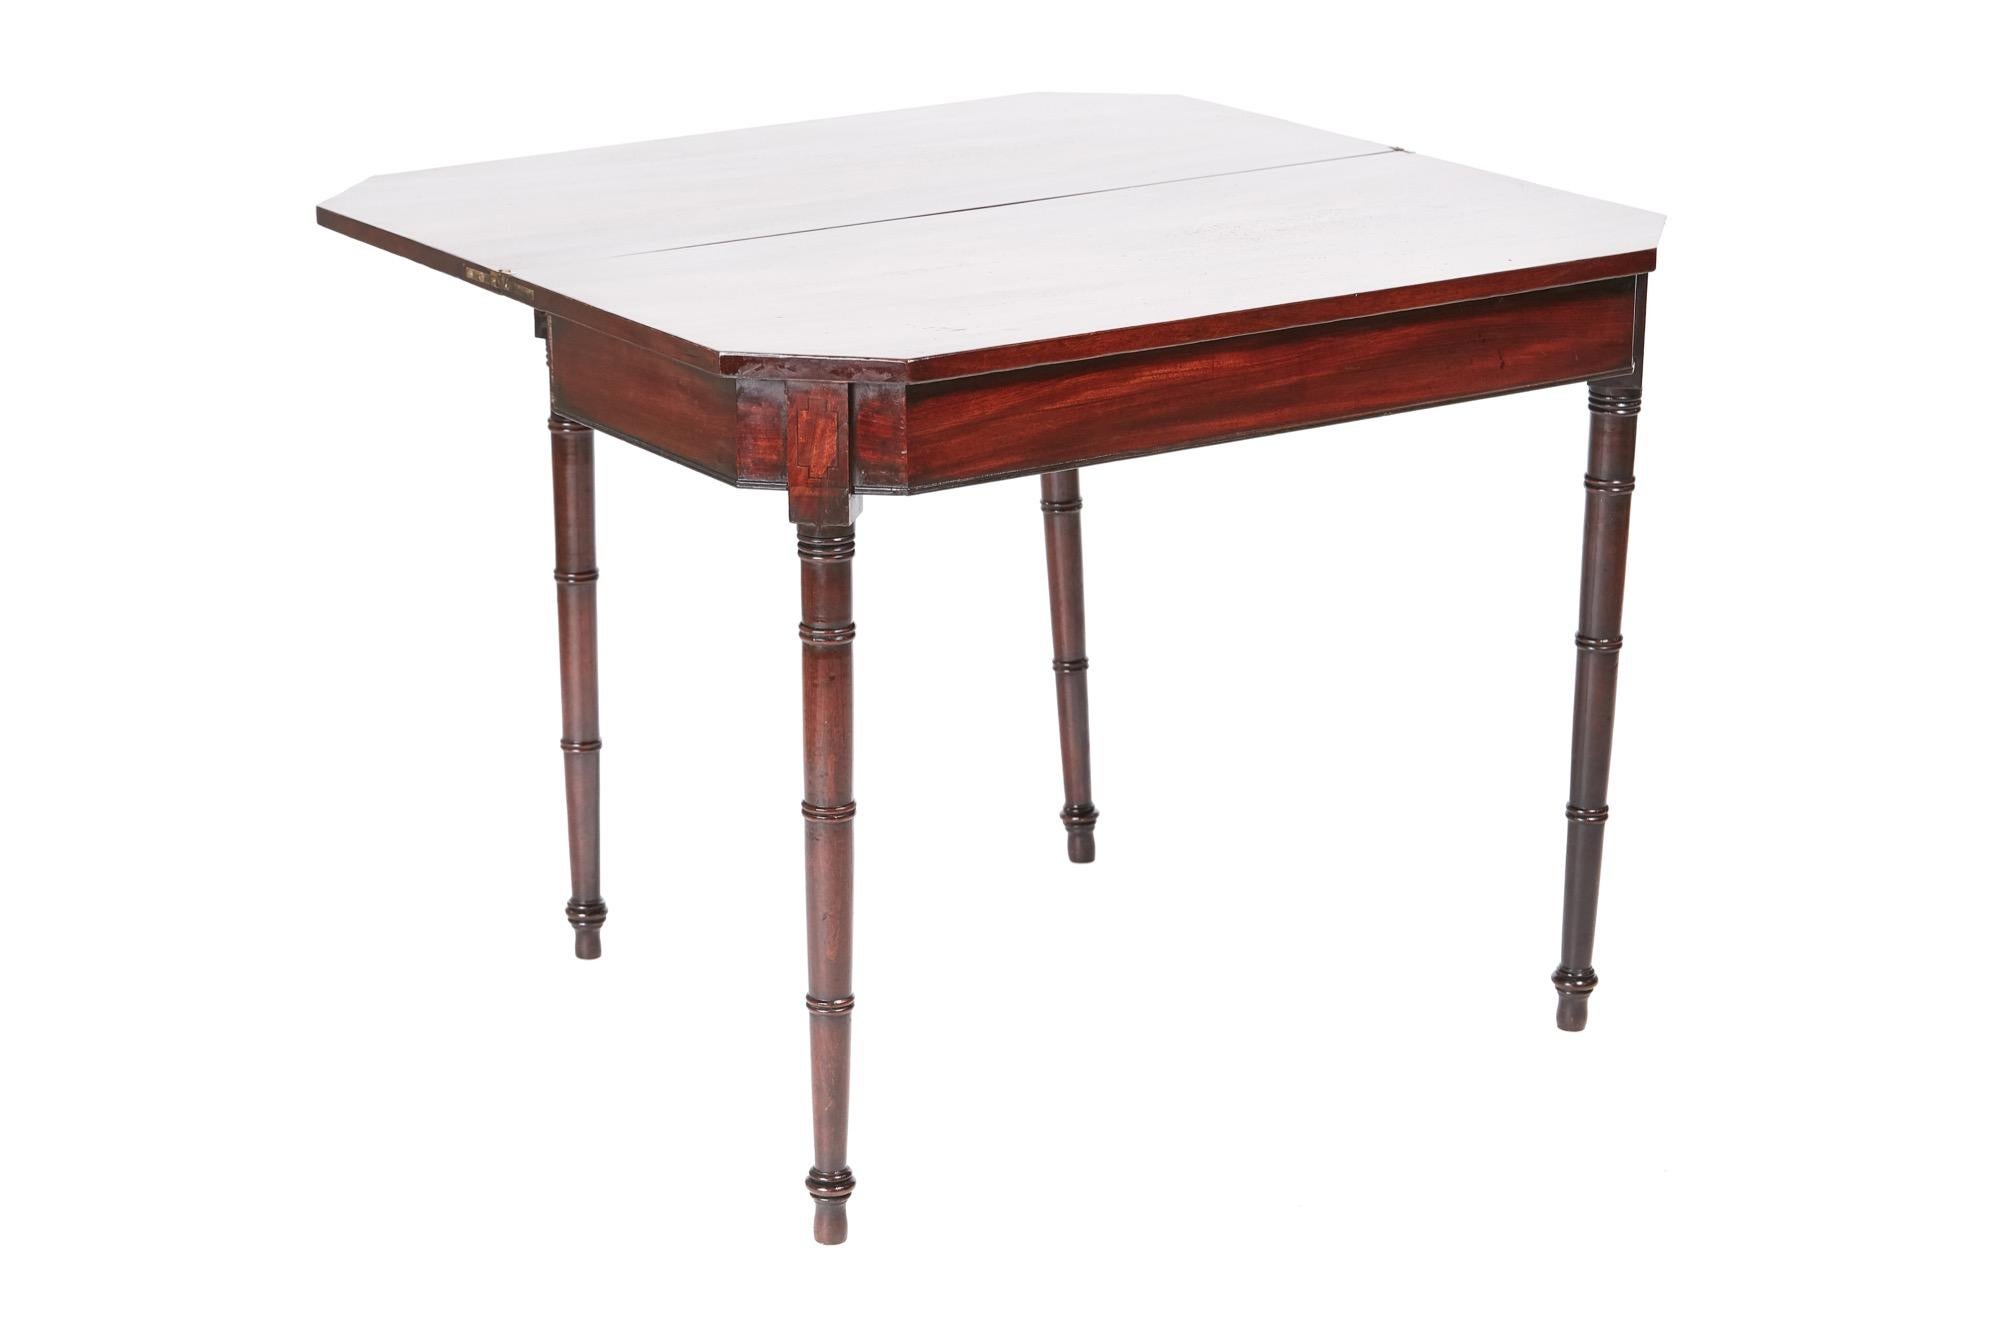 George III mahogany tea / side table, having a lovely mahogany folding top with ebony stringing, mahogany frieze with ebony stringing standing on turned tapering legs with unusual turned rings
Lovely color and condition
Measures: 36